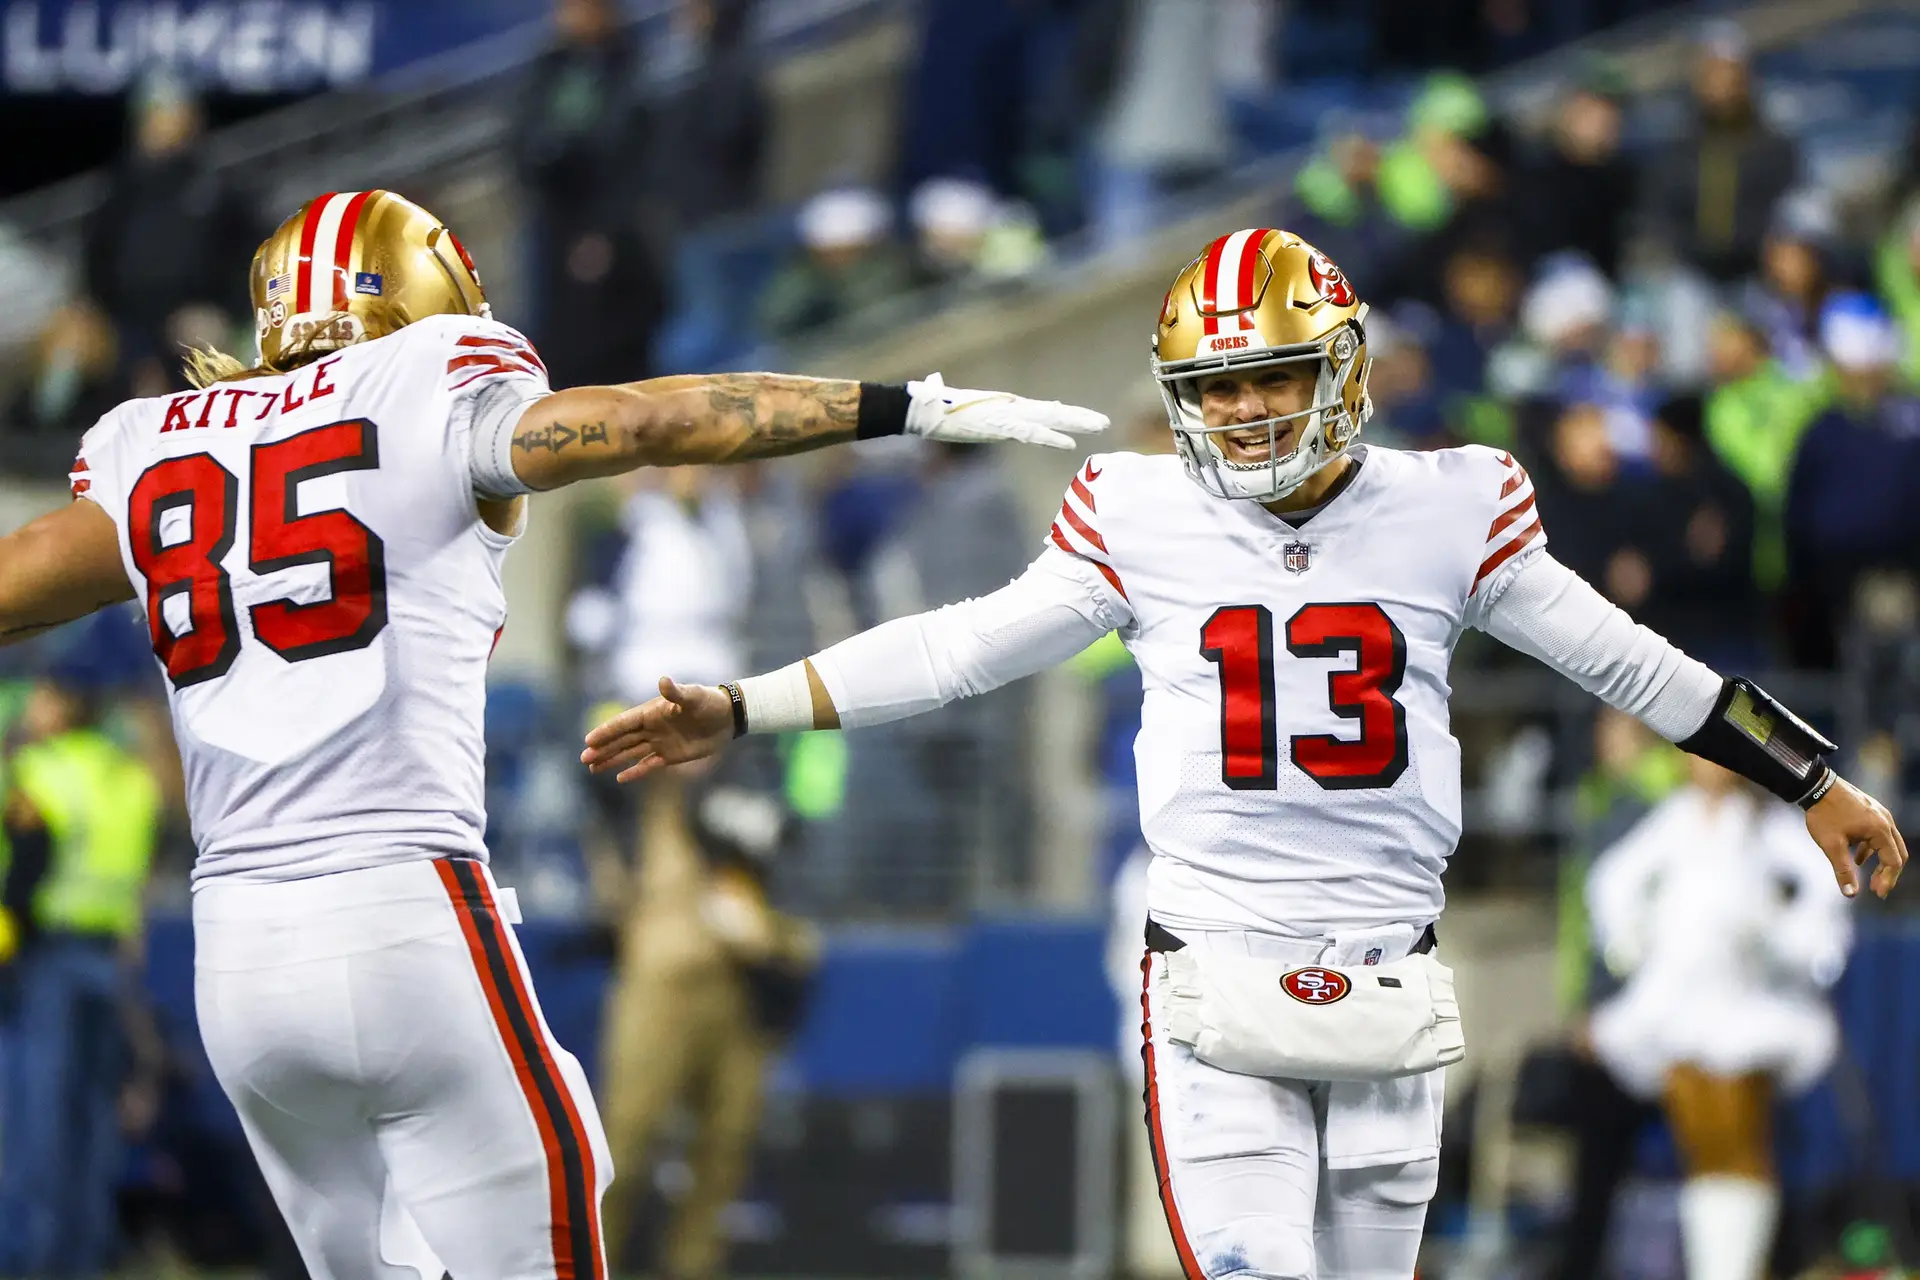 Dec 15, 2022; Seattle, Washington, USA; San Francisco 49ers quarterback Brock Purdy (13) celebrates with tight end George Kittle (85) during the late fourth quarter against the Seattle Seahawks at Lumen Field. Mandatory Credit: Joe Nicholson-USA TODAY Sports